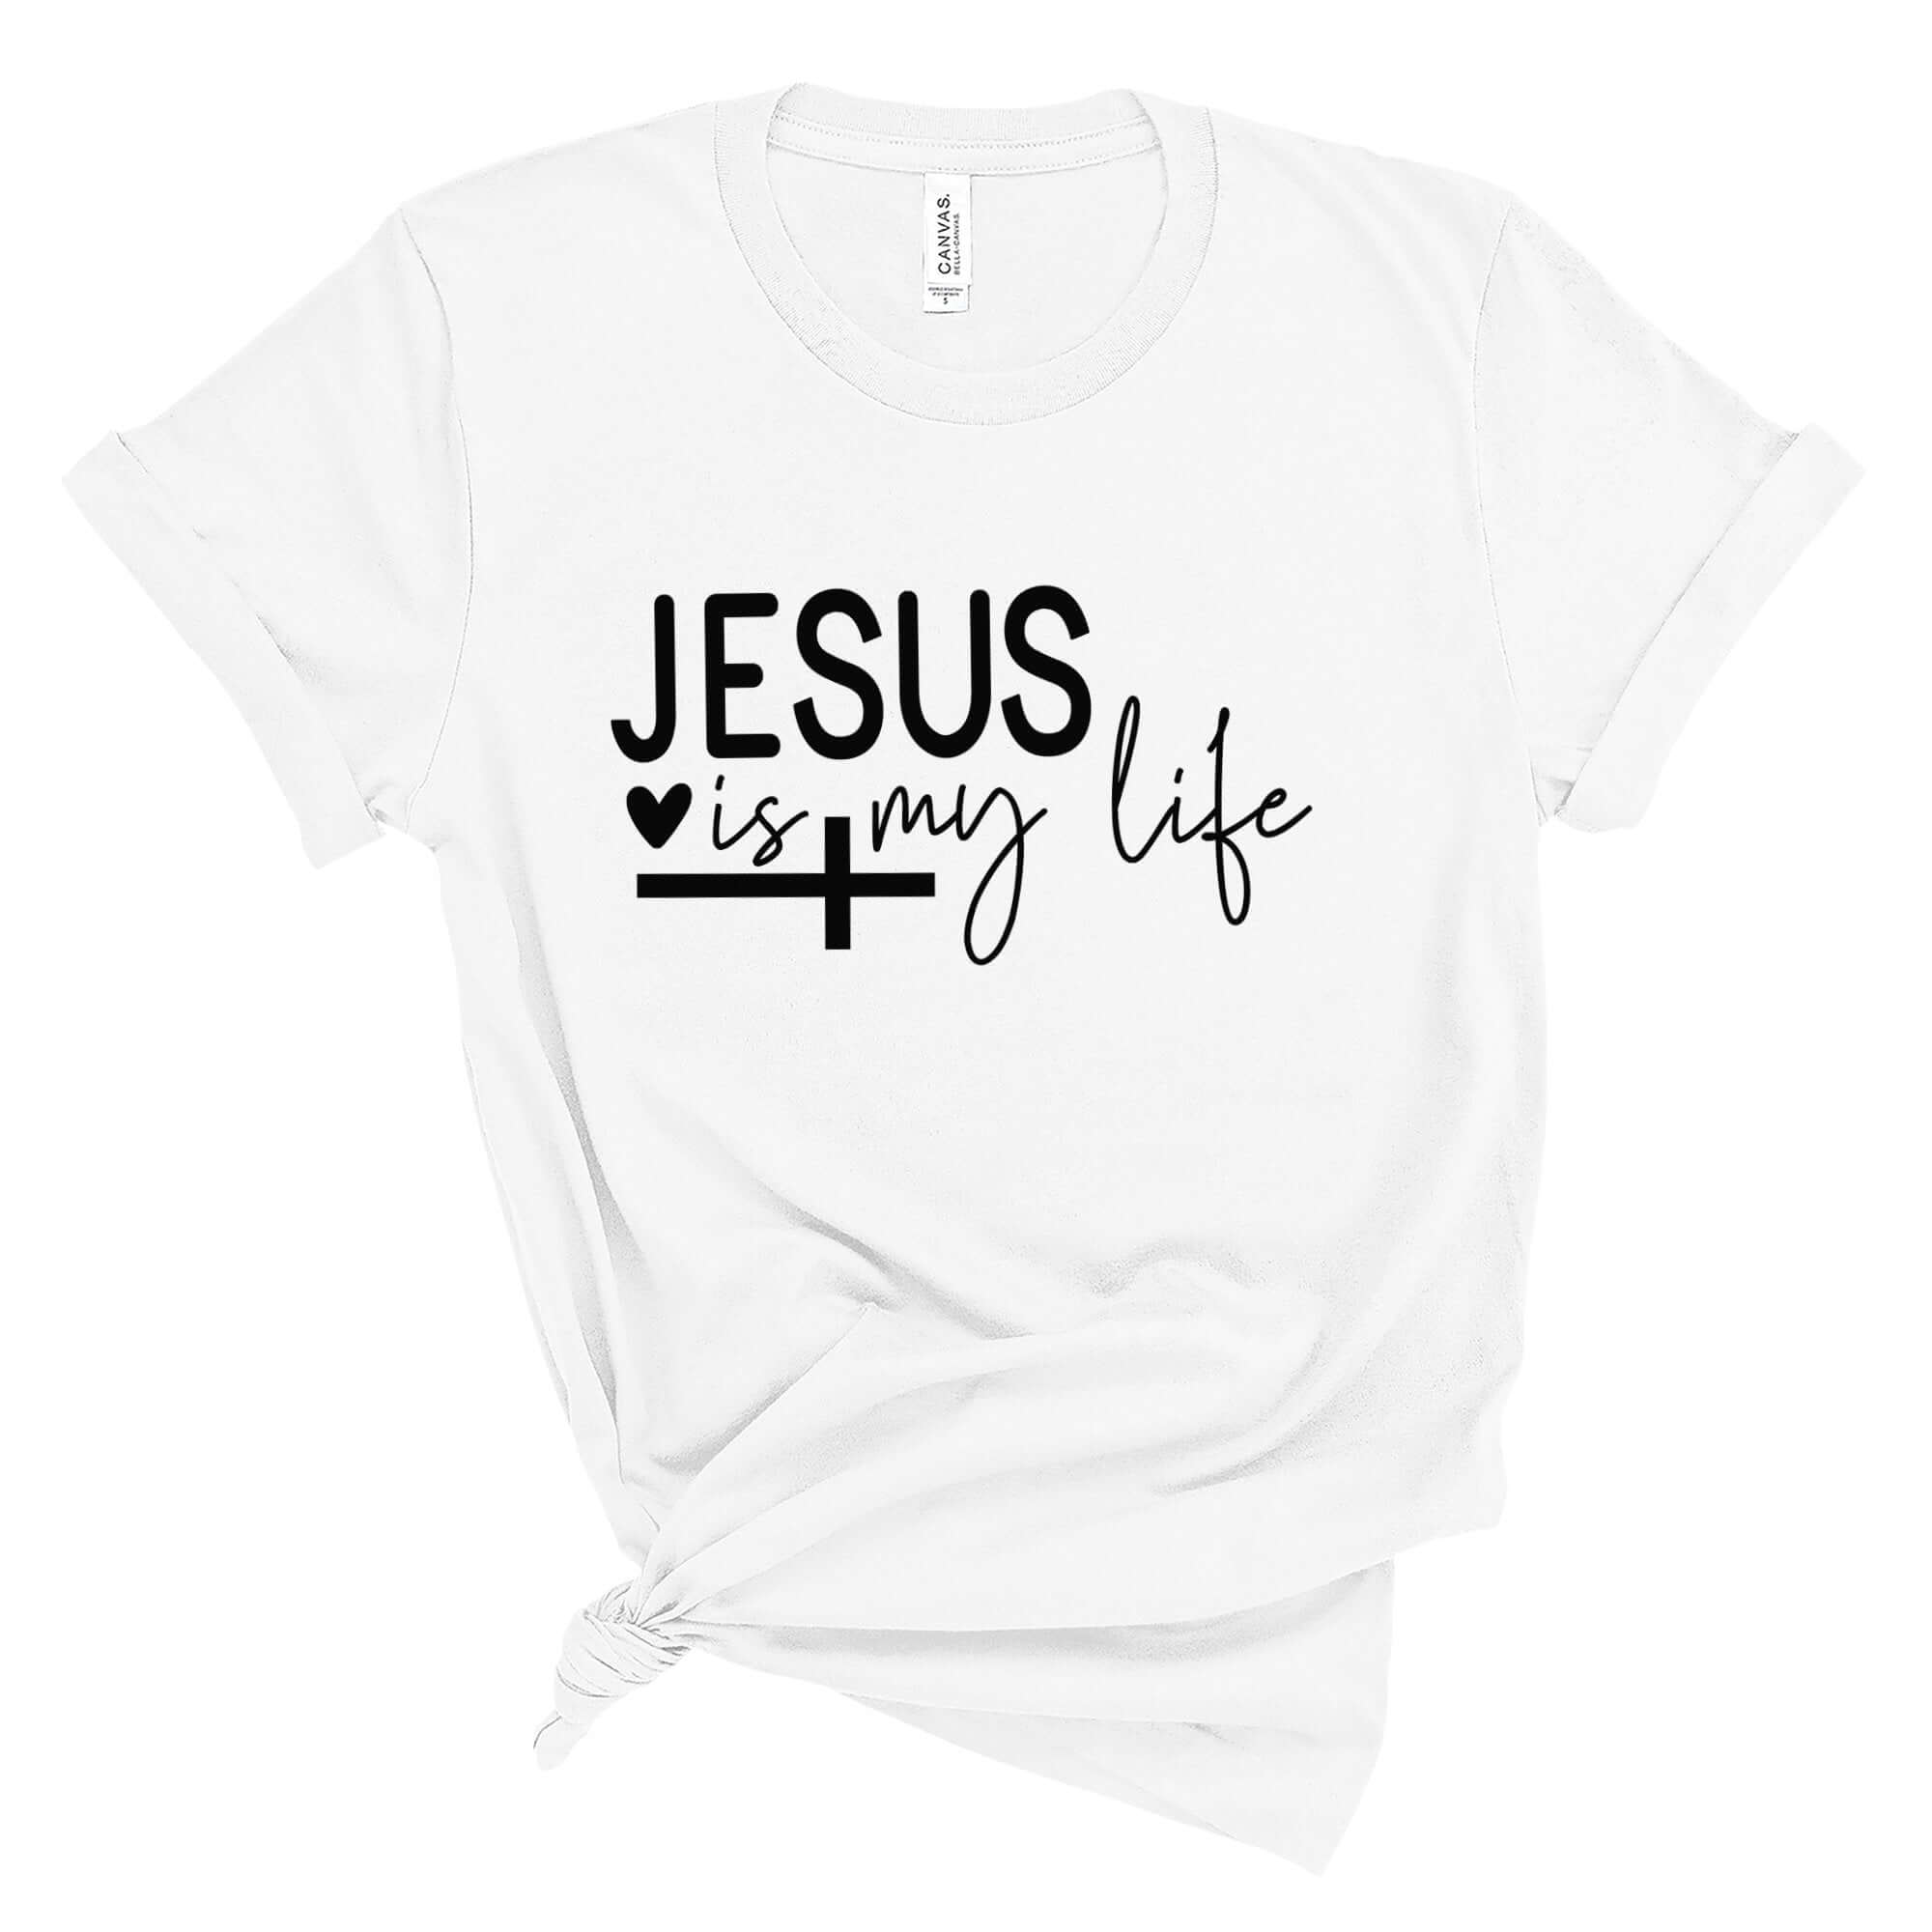 Jesus Is My Life Women's Short Sleeve TeeEmbrace your faith with this inspirational T-shirt featuring the powerful message "Jesus is my life" displayed in a beautiful, artistic font. Ideal for casual wear, church events, or as a thoughtful gift, this T-sh